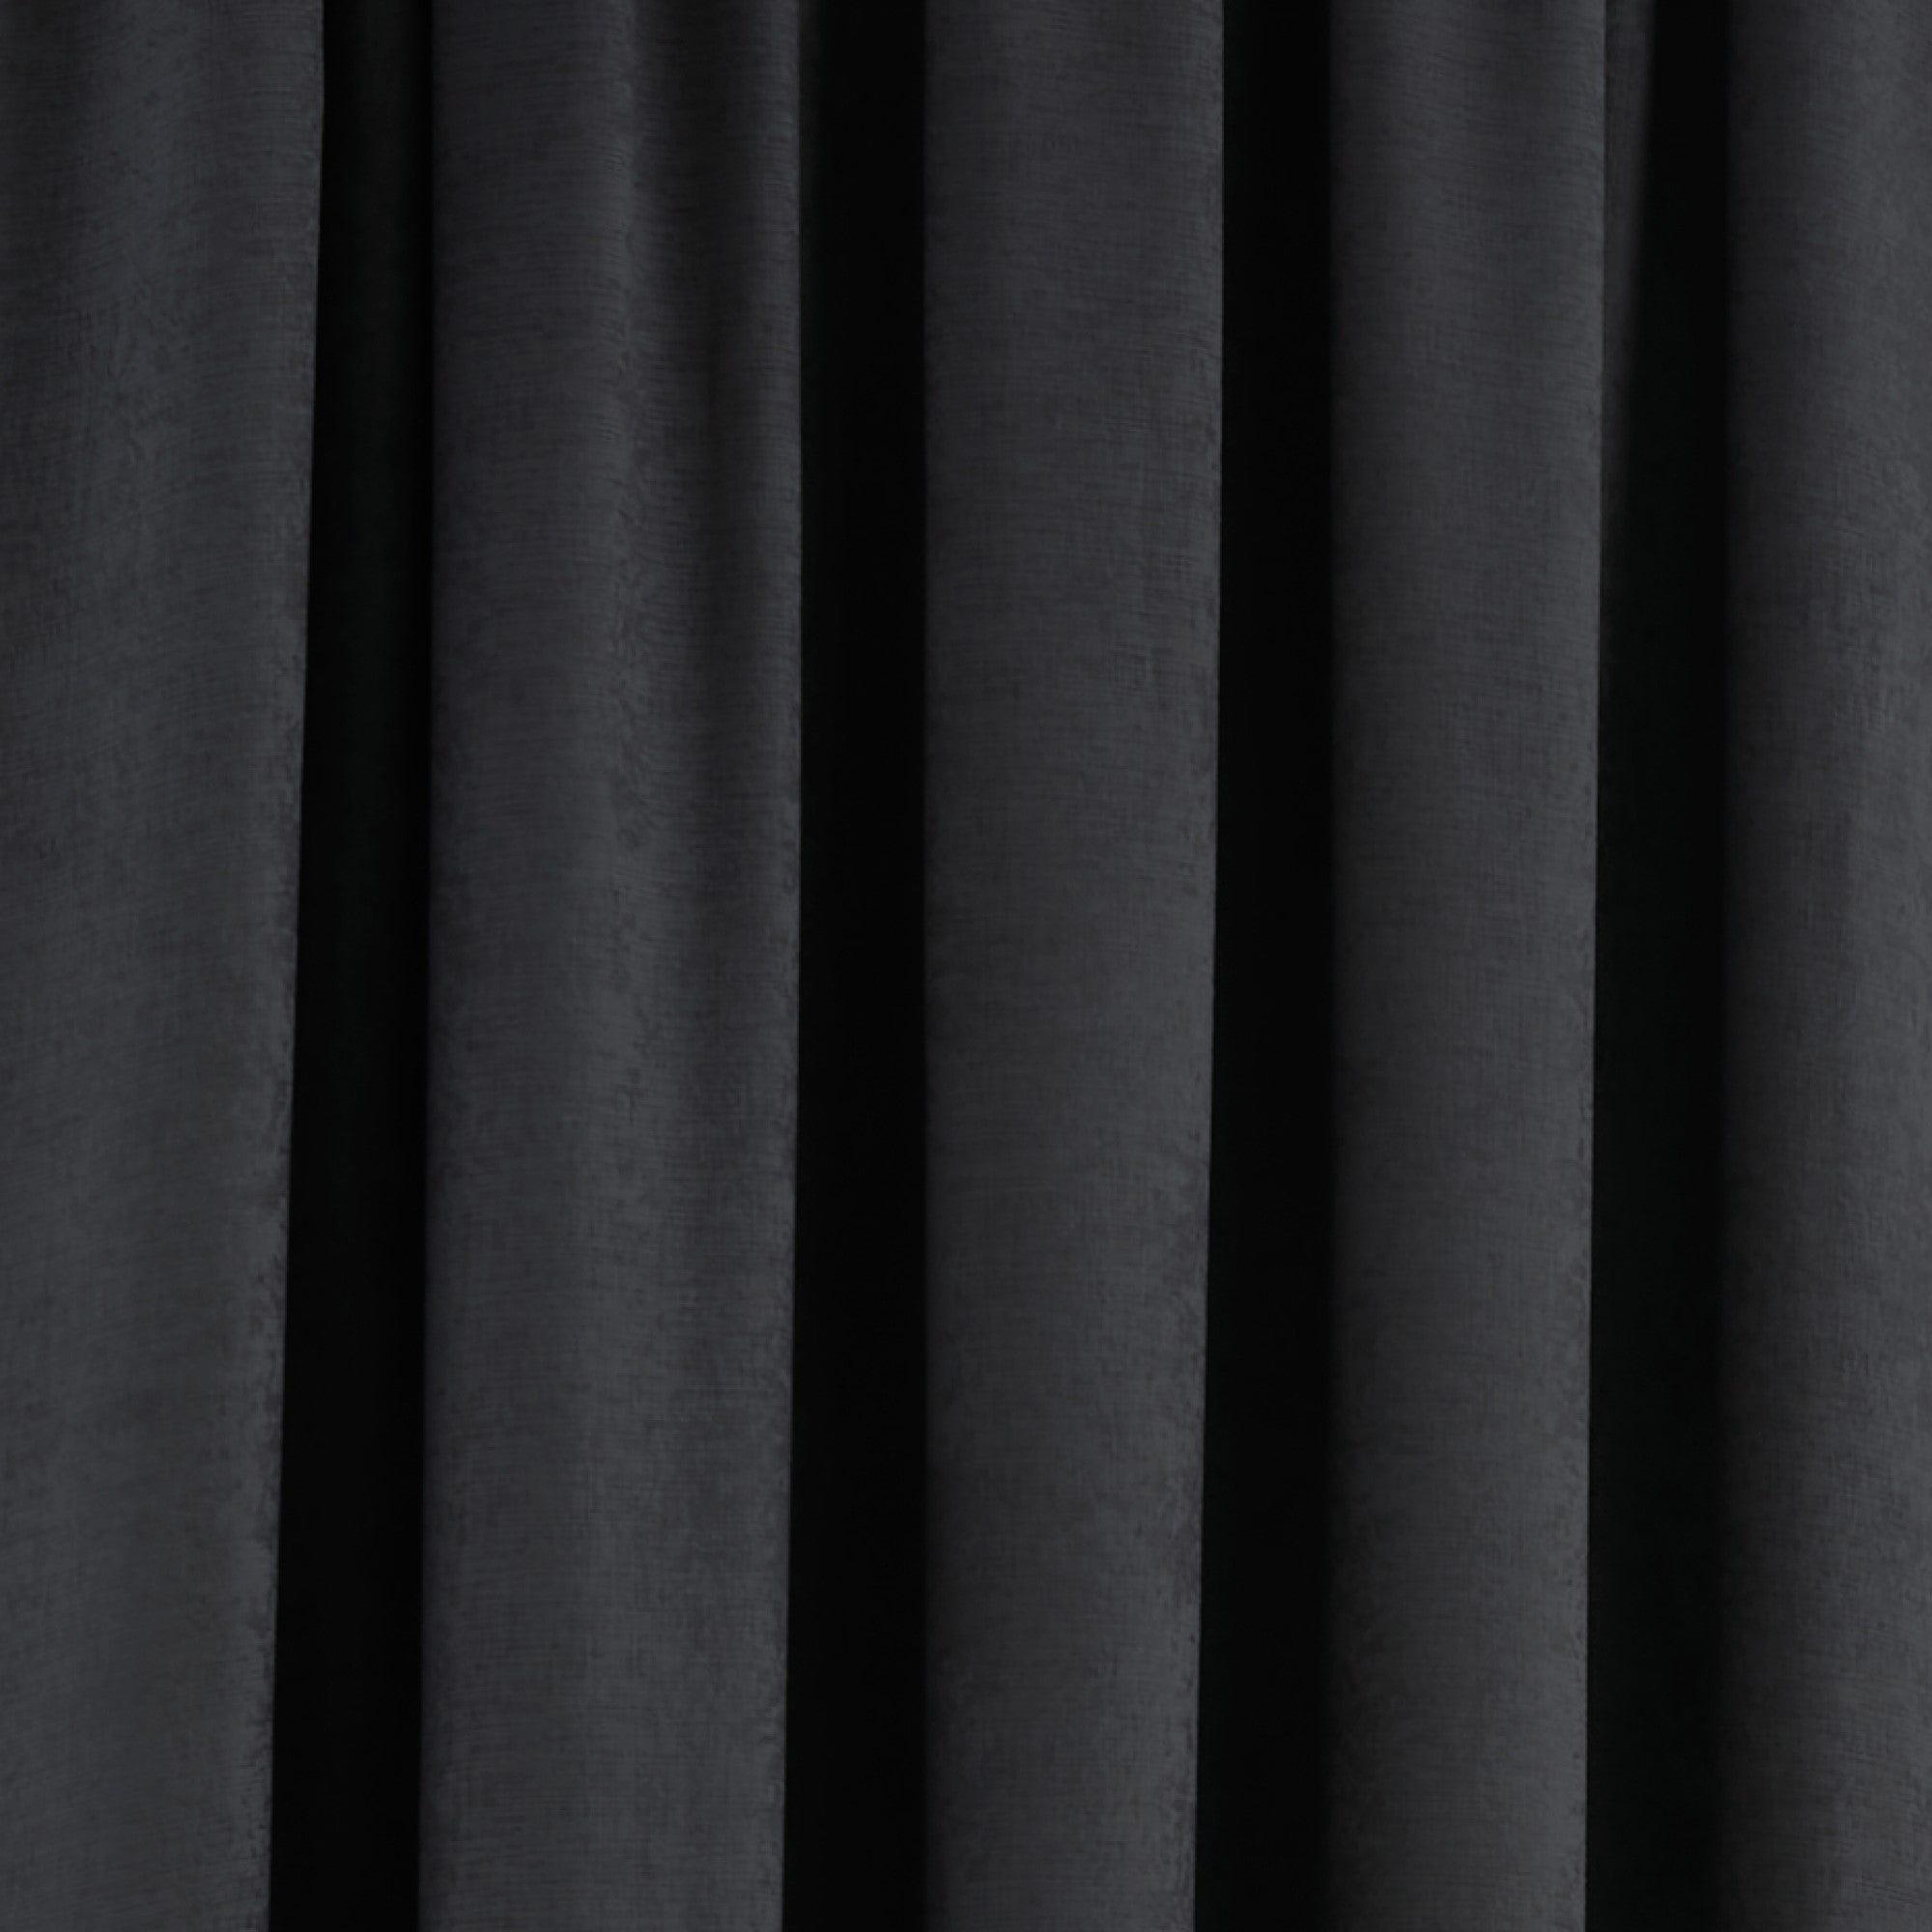 Pair of Pencil Pleat Curtains Galaxy by Fusion in Black